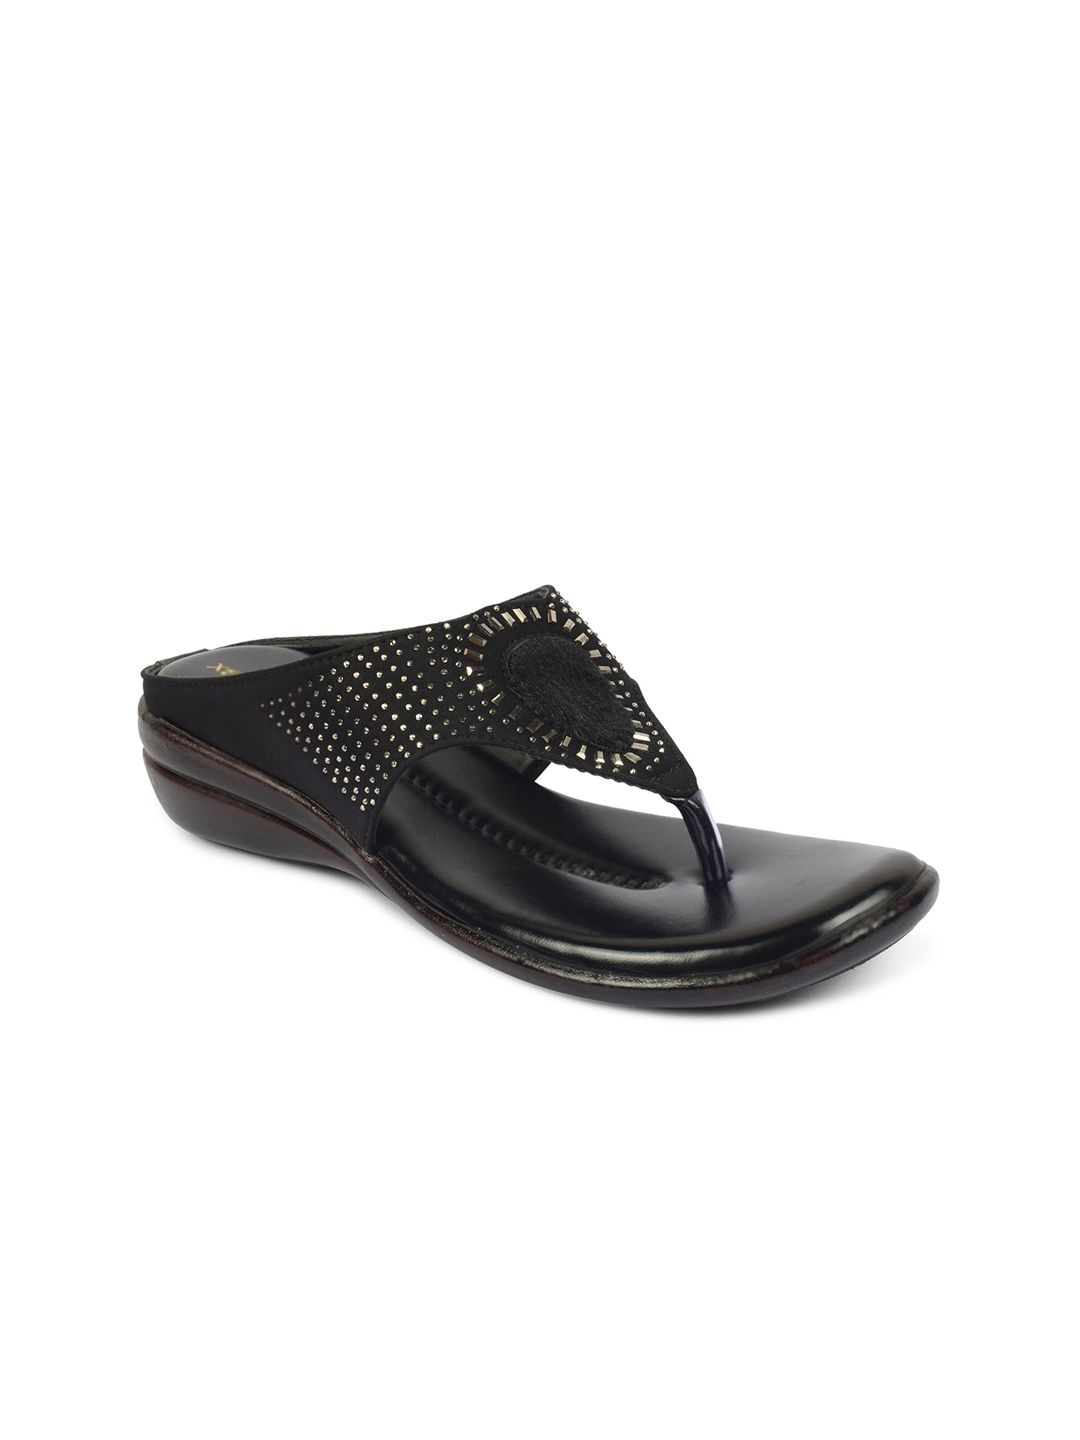 XE LOOKS Women Black Embellished T-Strap Flats with Laser Cuts Price in India